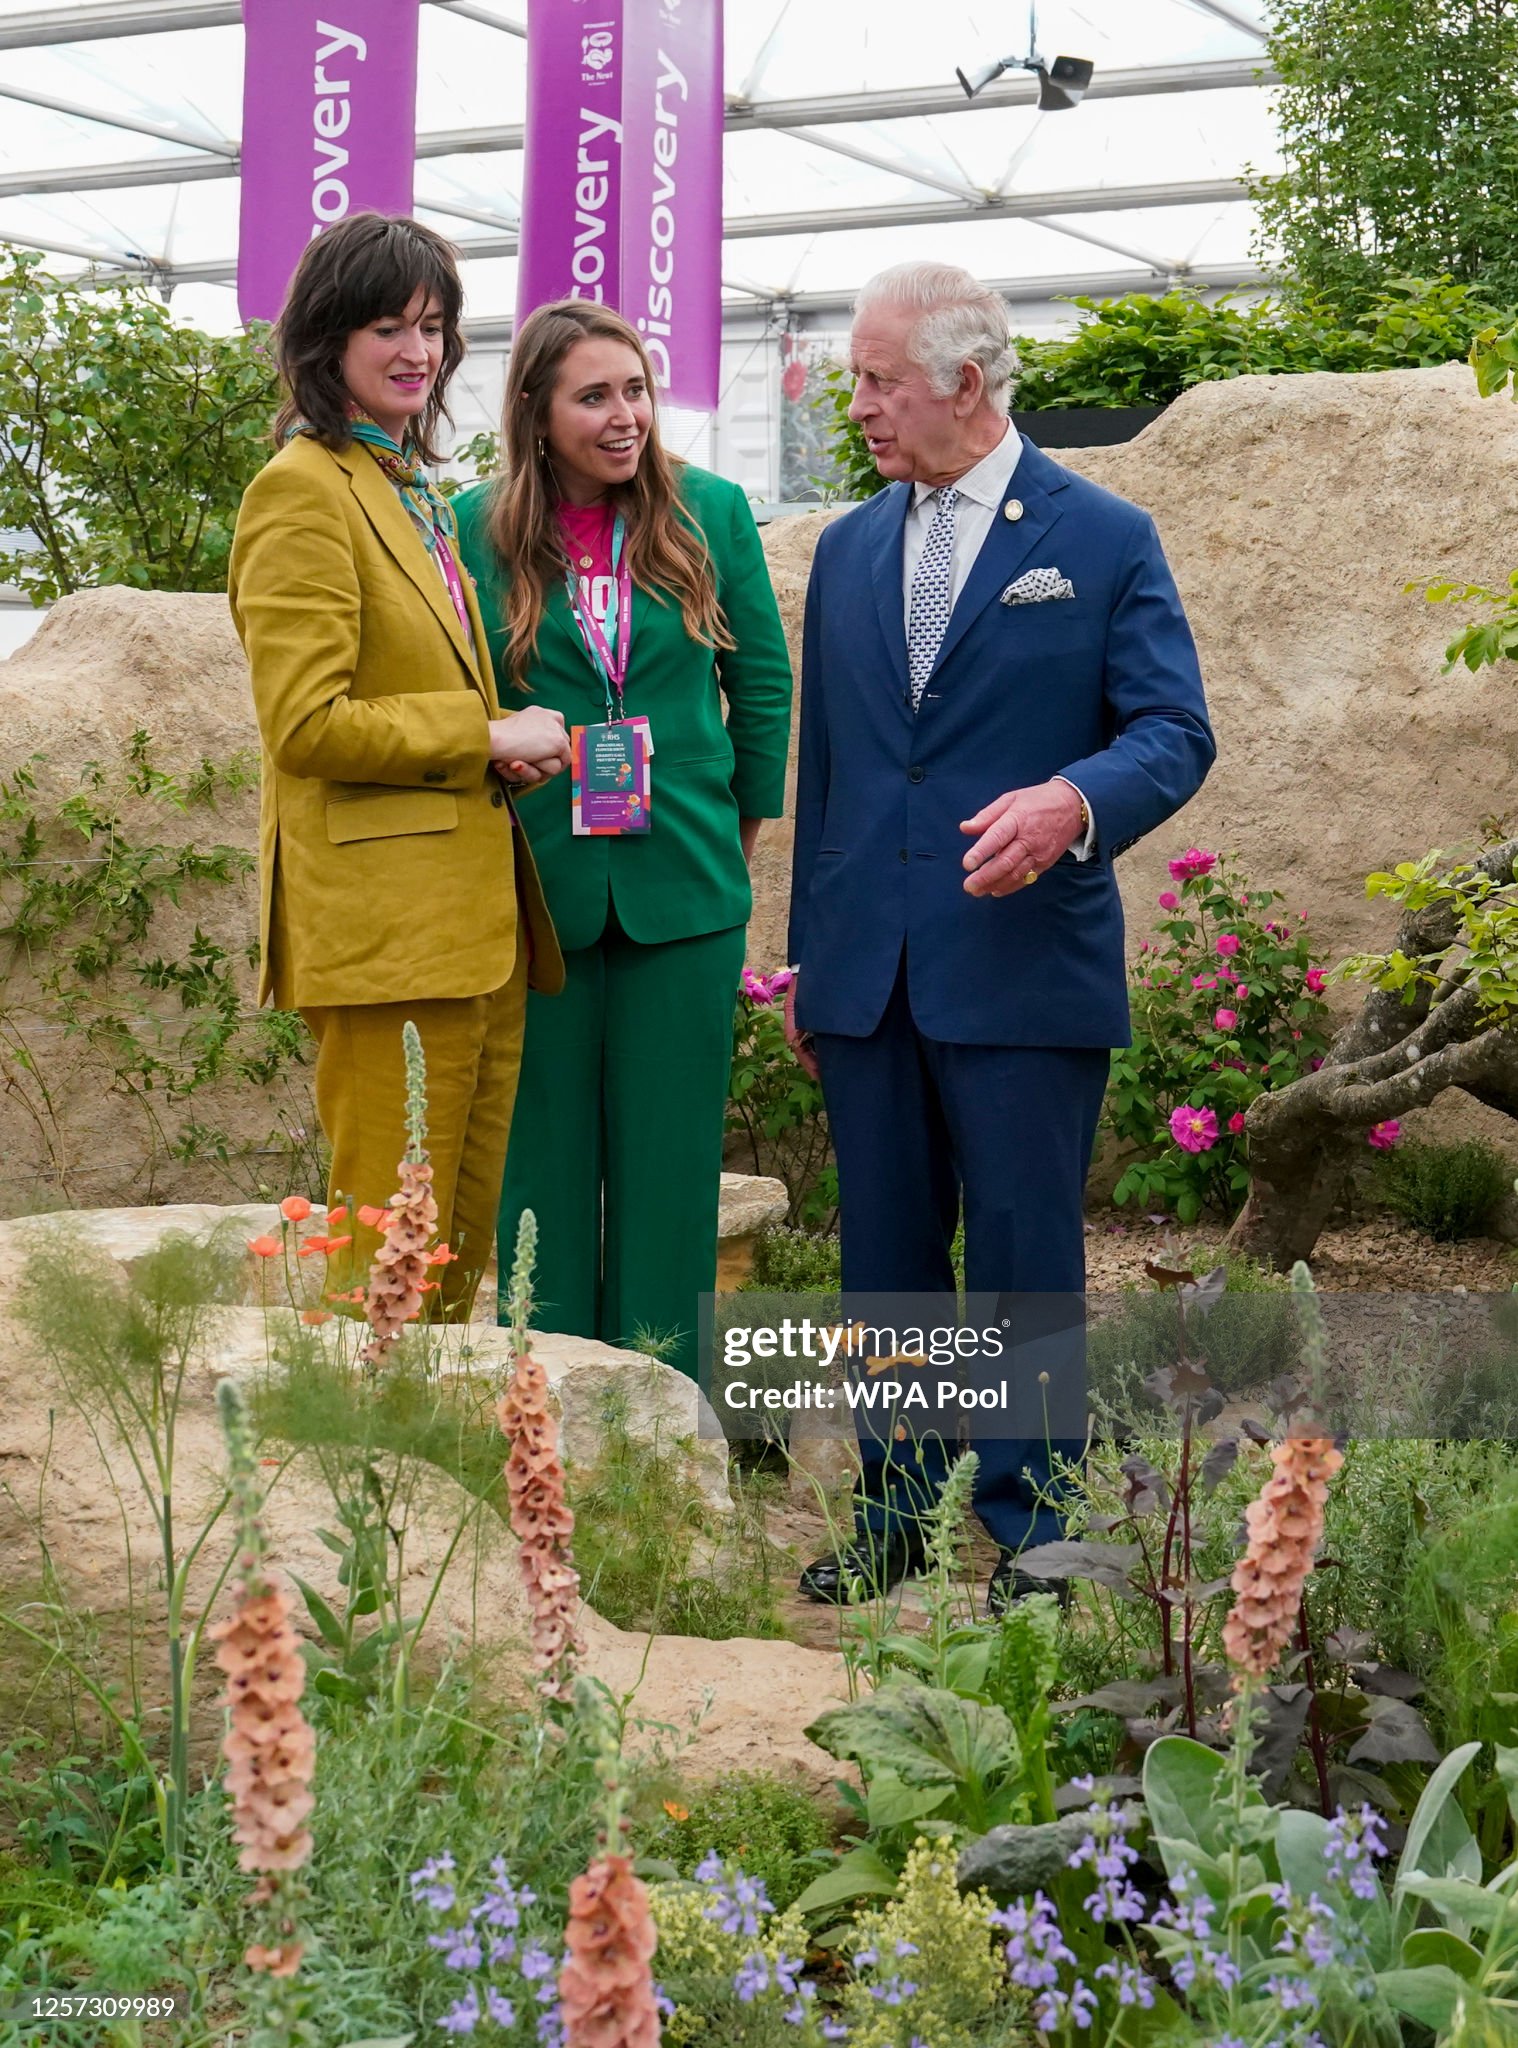 britains-king-charles-iii-with-josie-maughton-and-jane-porter-with-the-king-in-the-choose-love.jpg